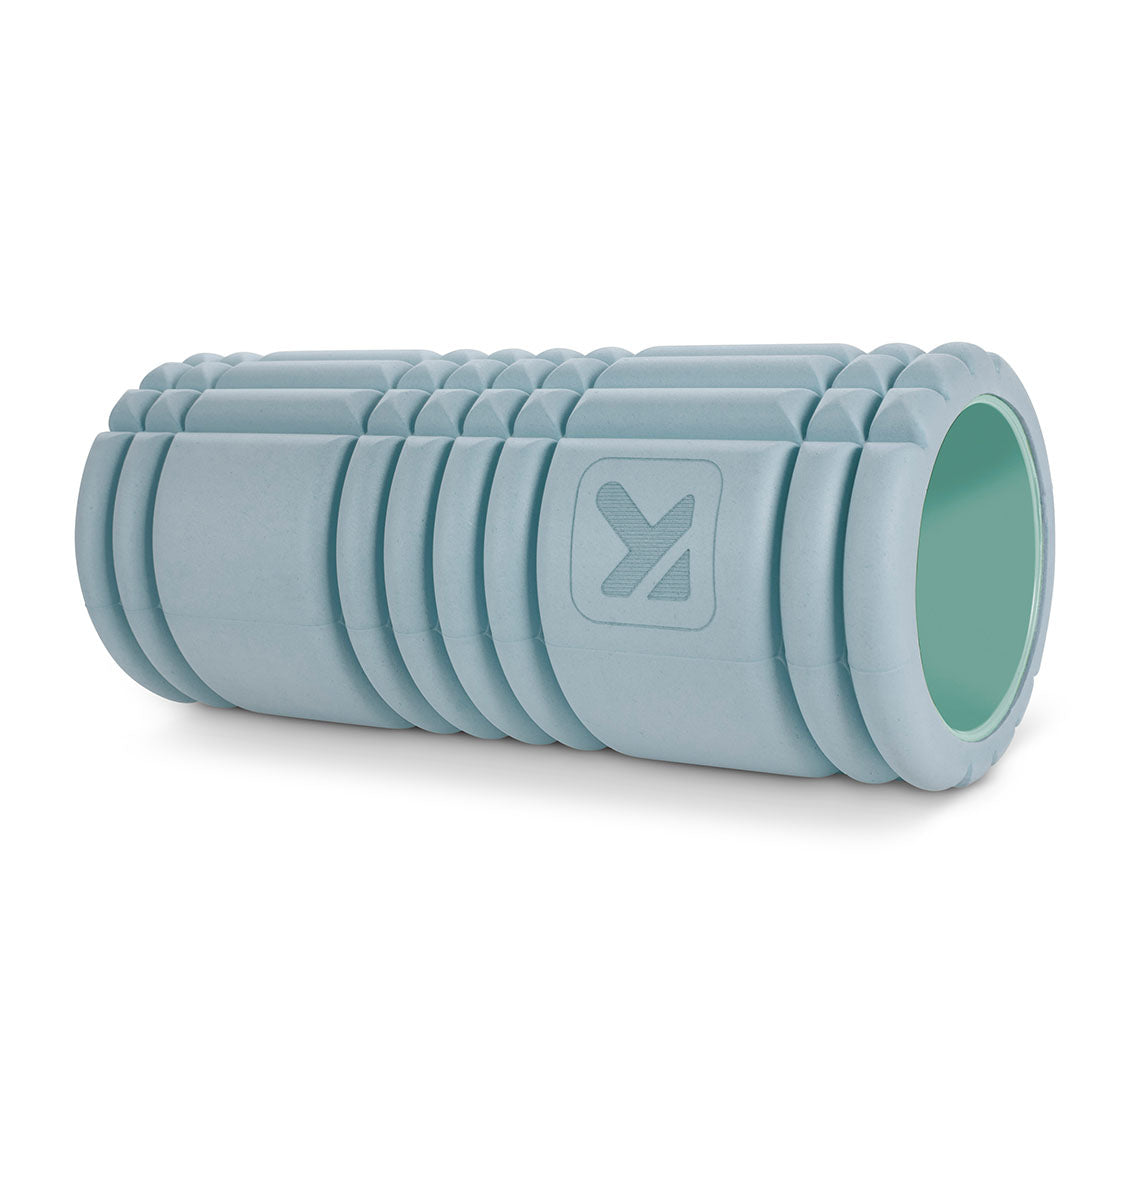 TriggerPoint GRID 1.0 Foam Roller - Recycled - 4